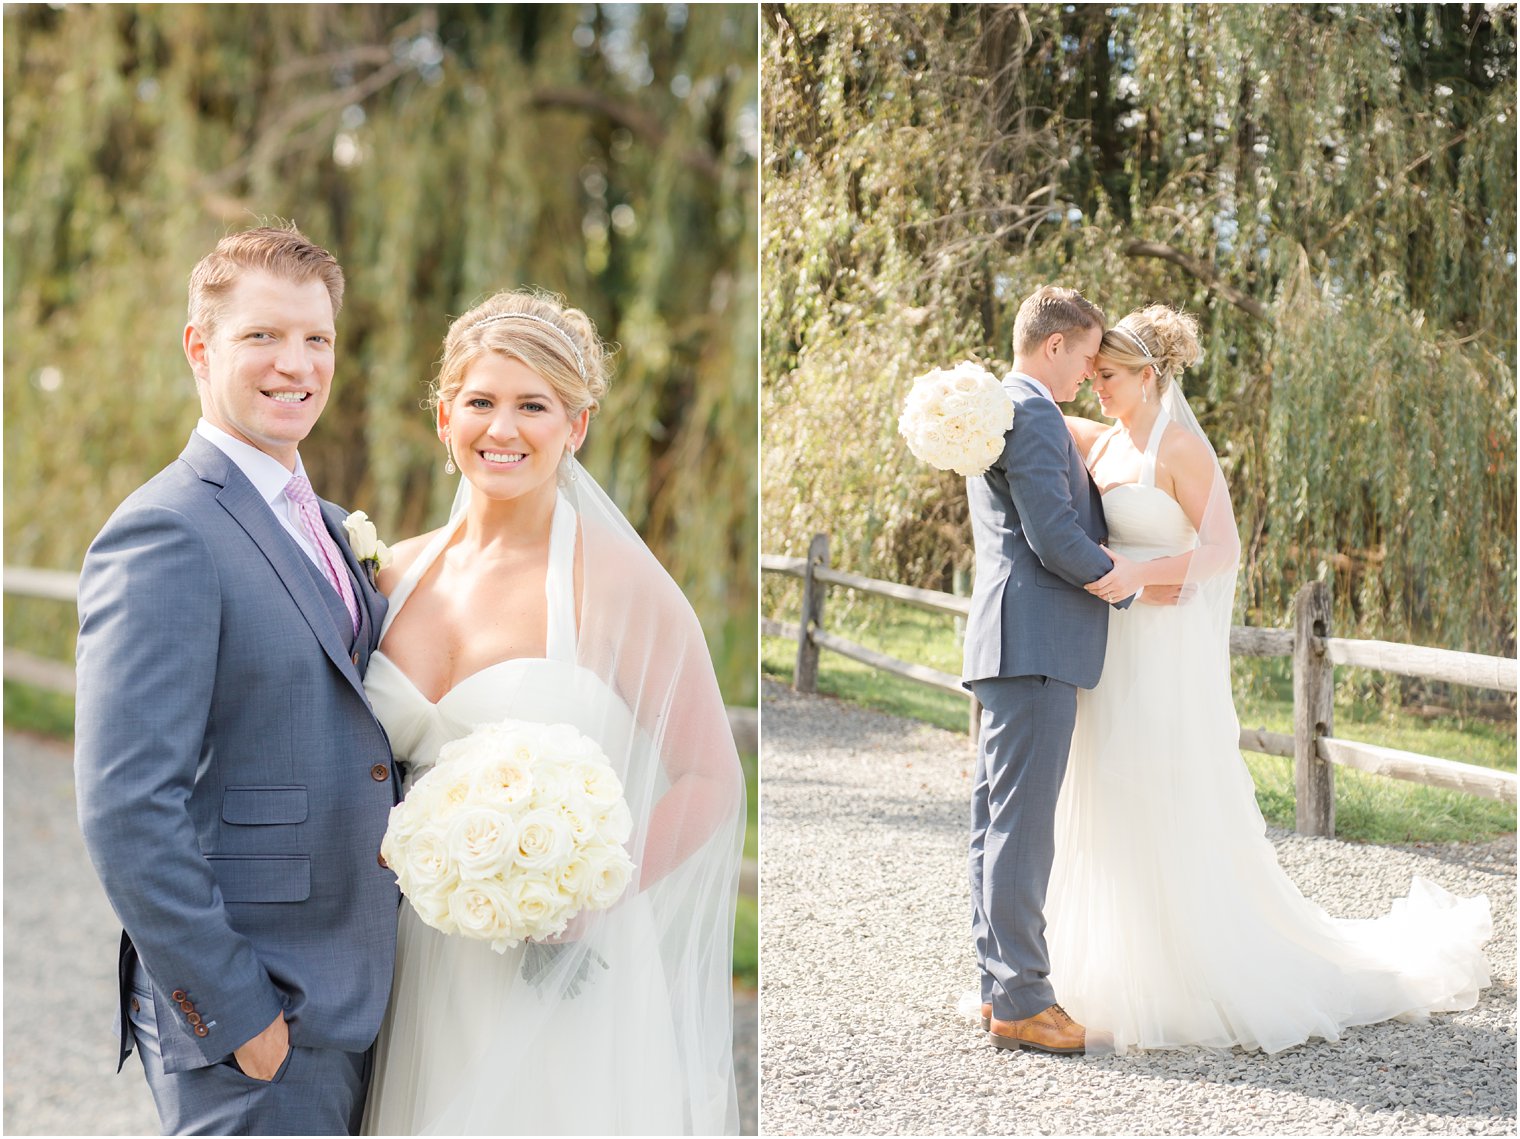 Romantic photos of bride and groom at Windows on the Water at Frogbridge Wedding